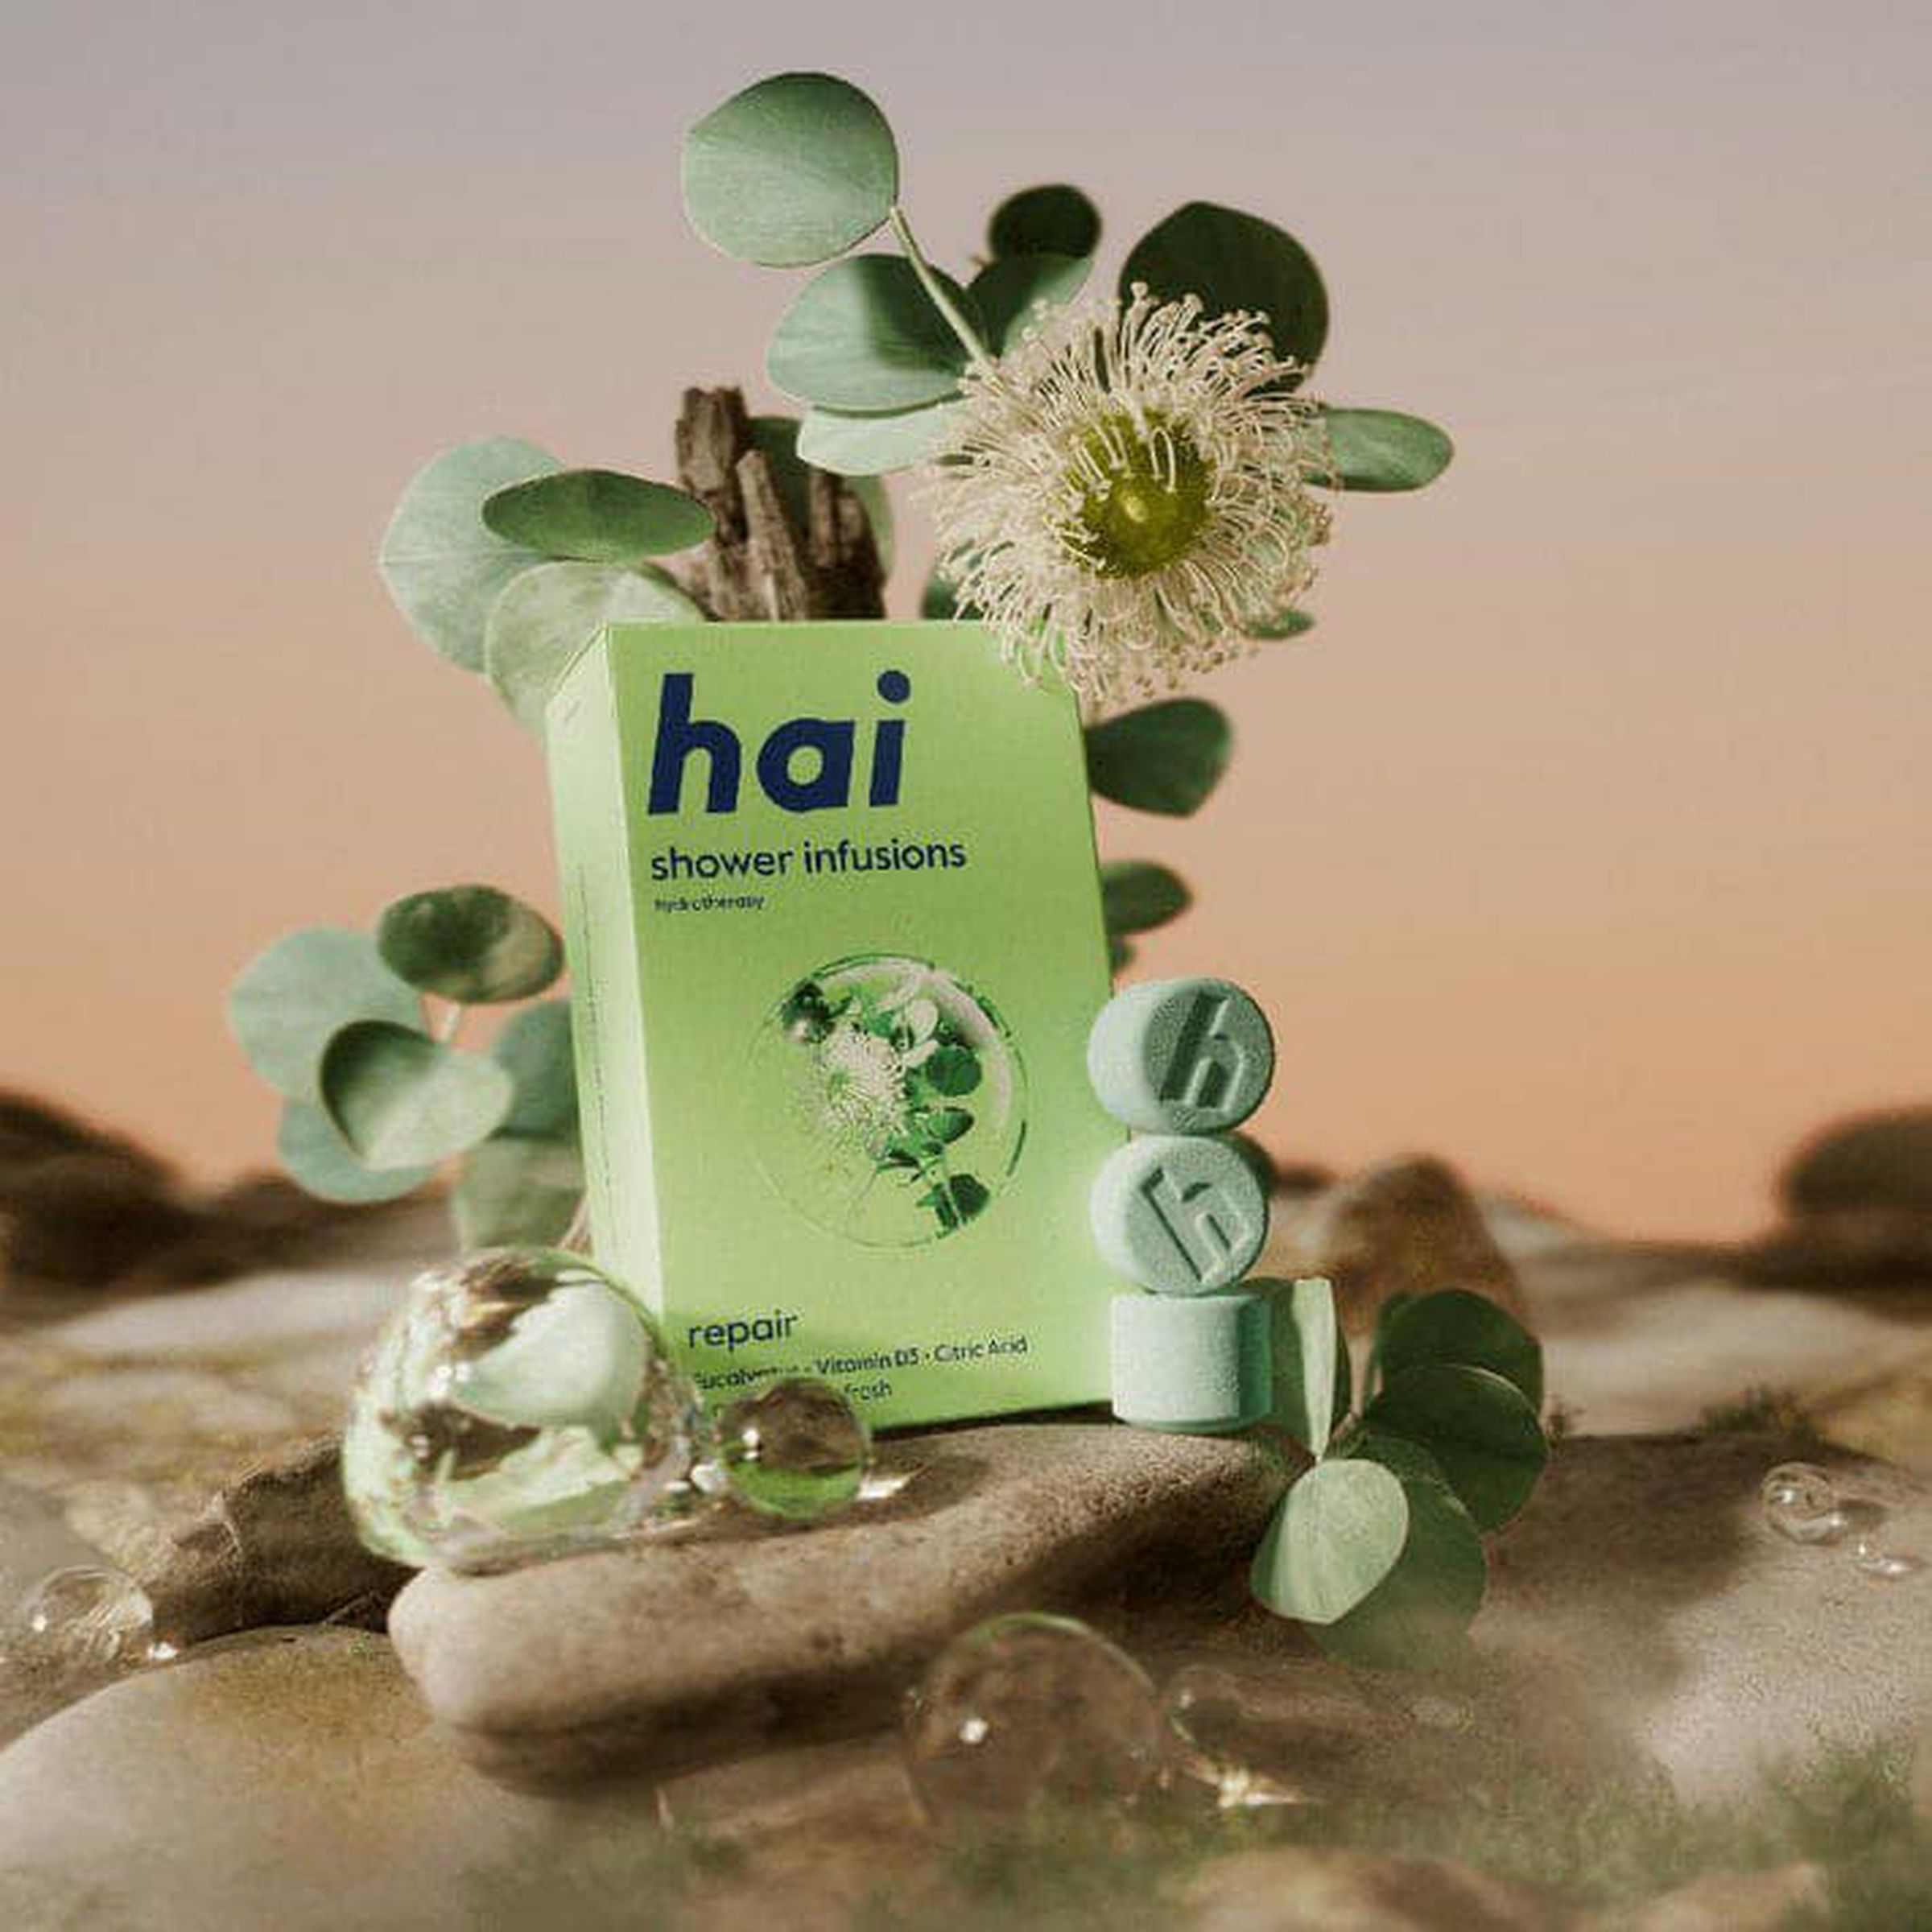 Hai shower infusion tablets in a package.